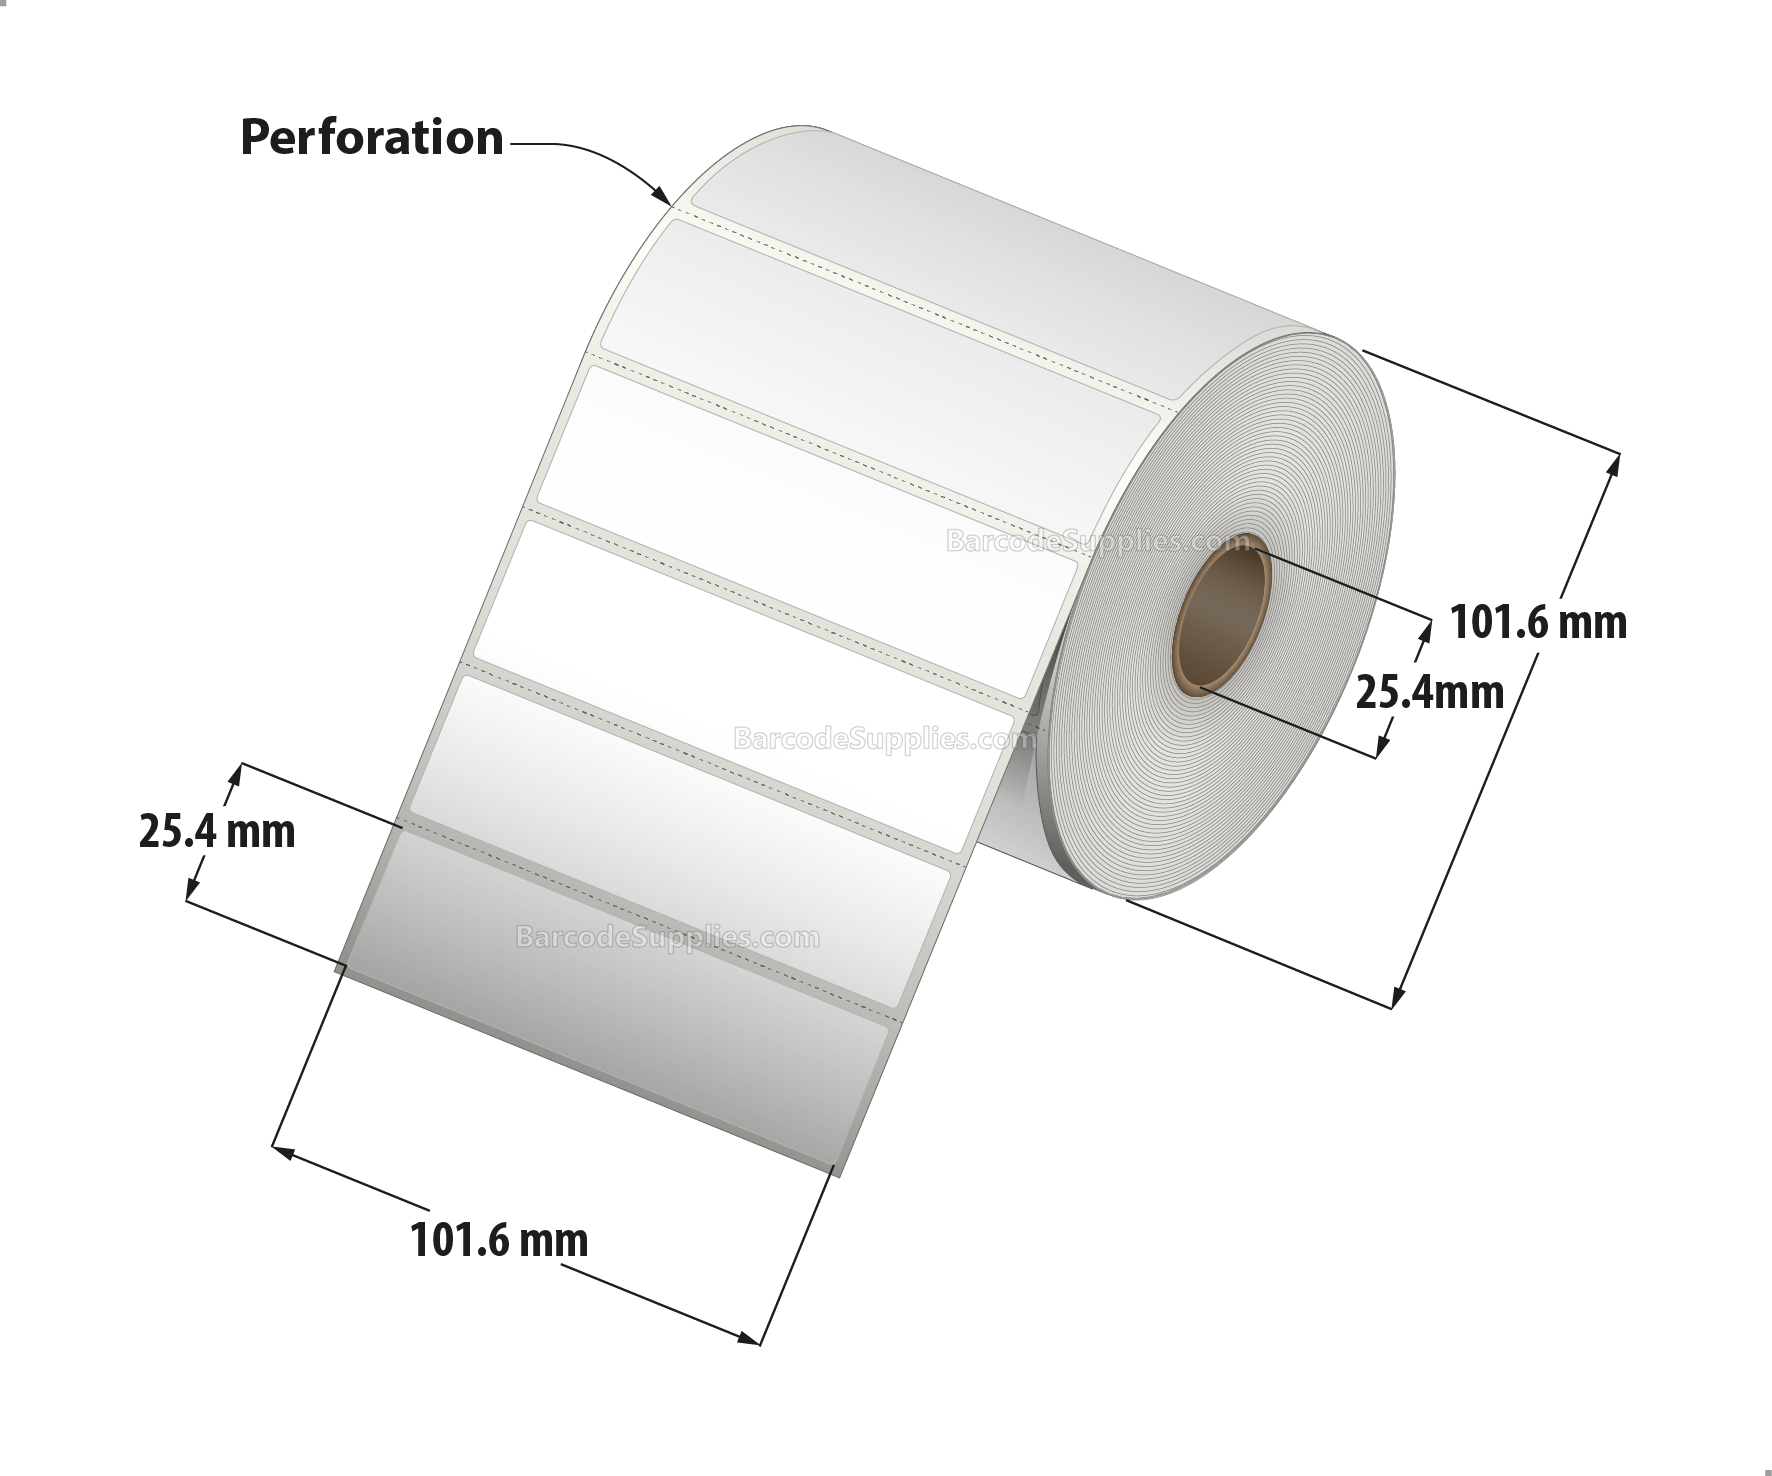 4 x 1 Thermal Transfer White Labels With Rubber Adhesive - Perforated - 1310 Labels Per Roll - Carton Of 12 Rolls - 15720 Labels Total - MPN: RTT4-400100-1P